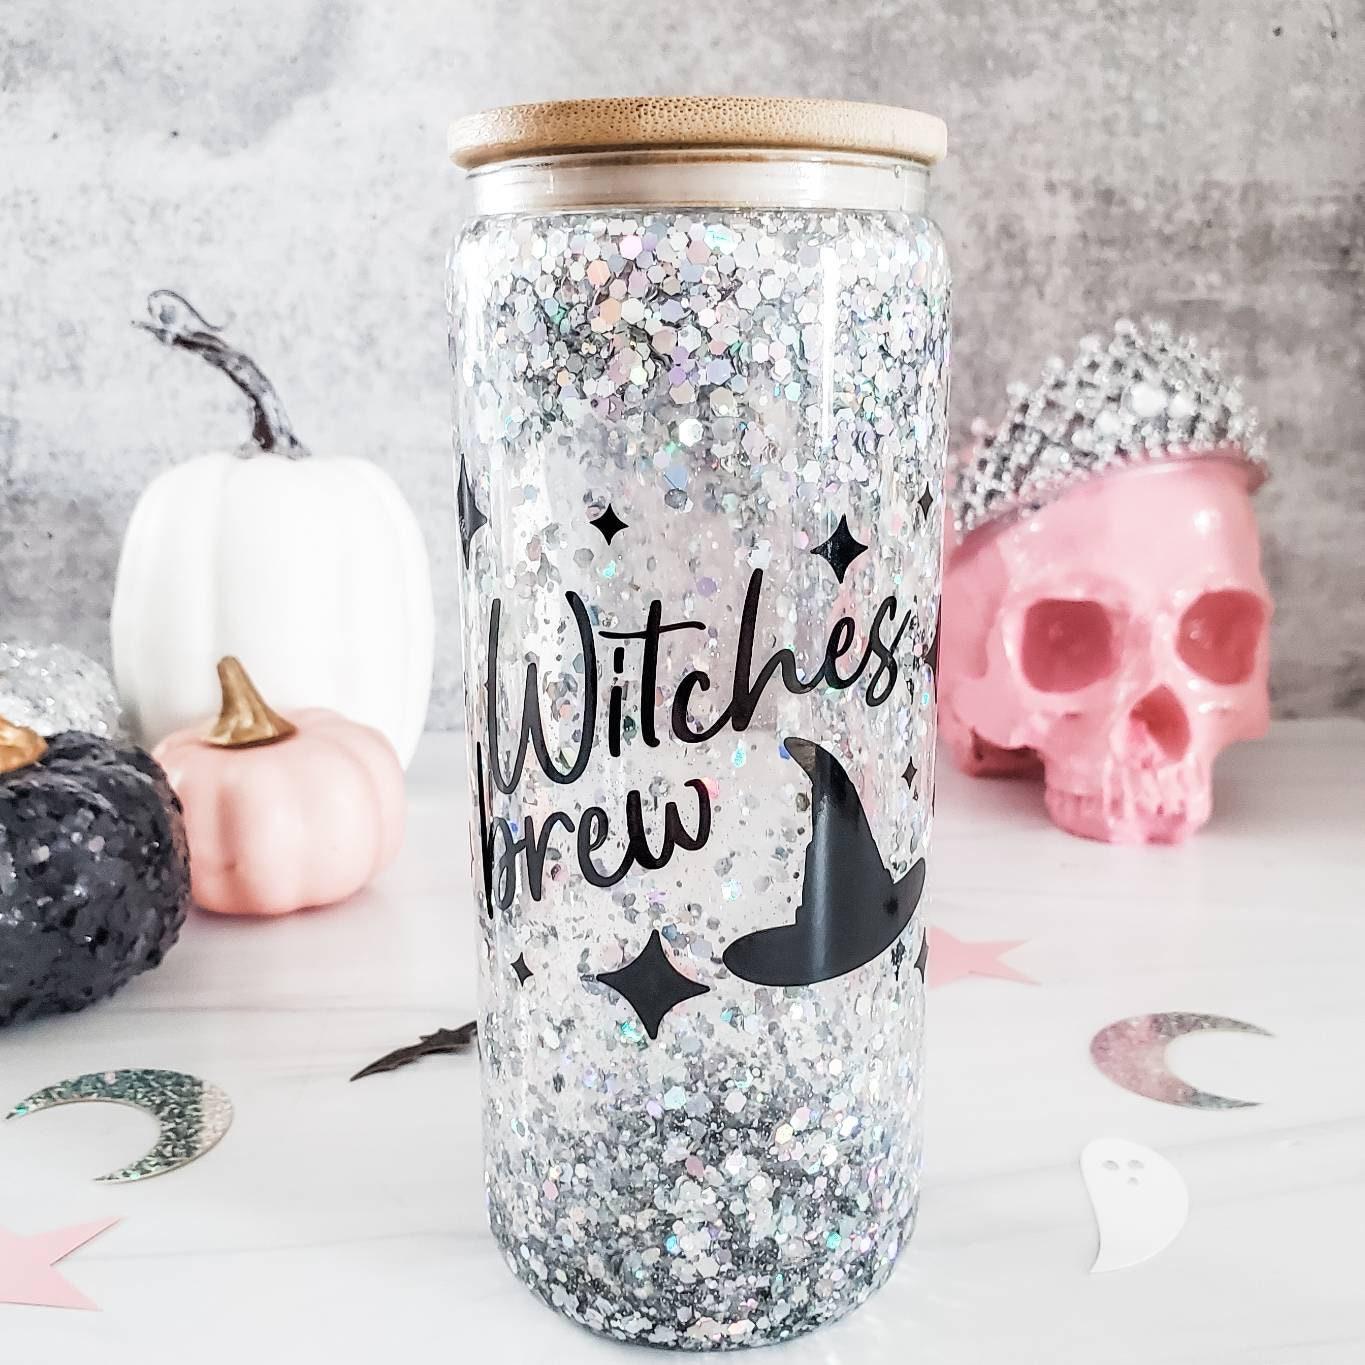 Friendly Ghosts Halloween Snowglobe Glitter Iced Coffee Cup Salt and Sparkle